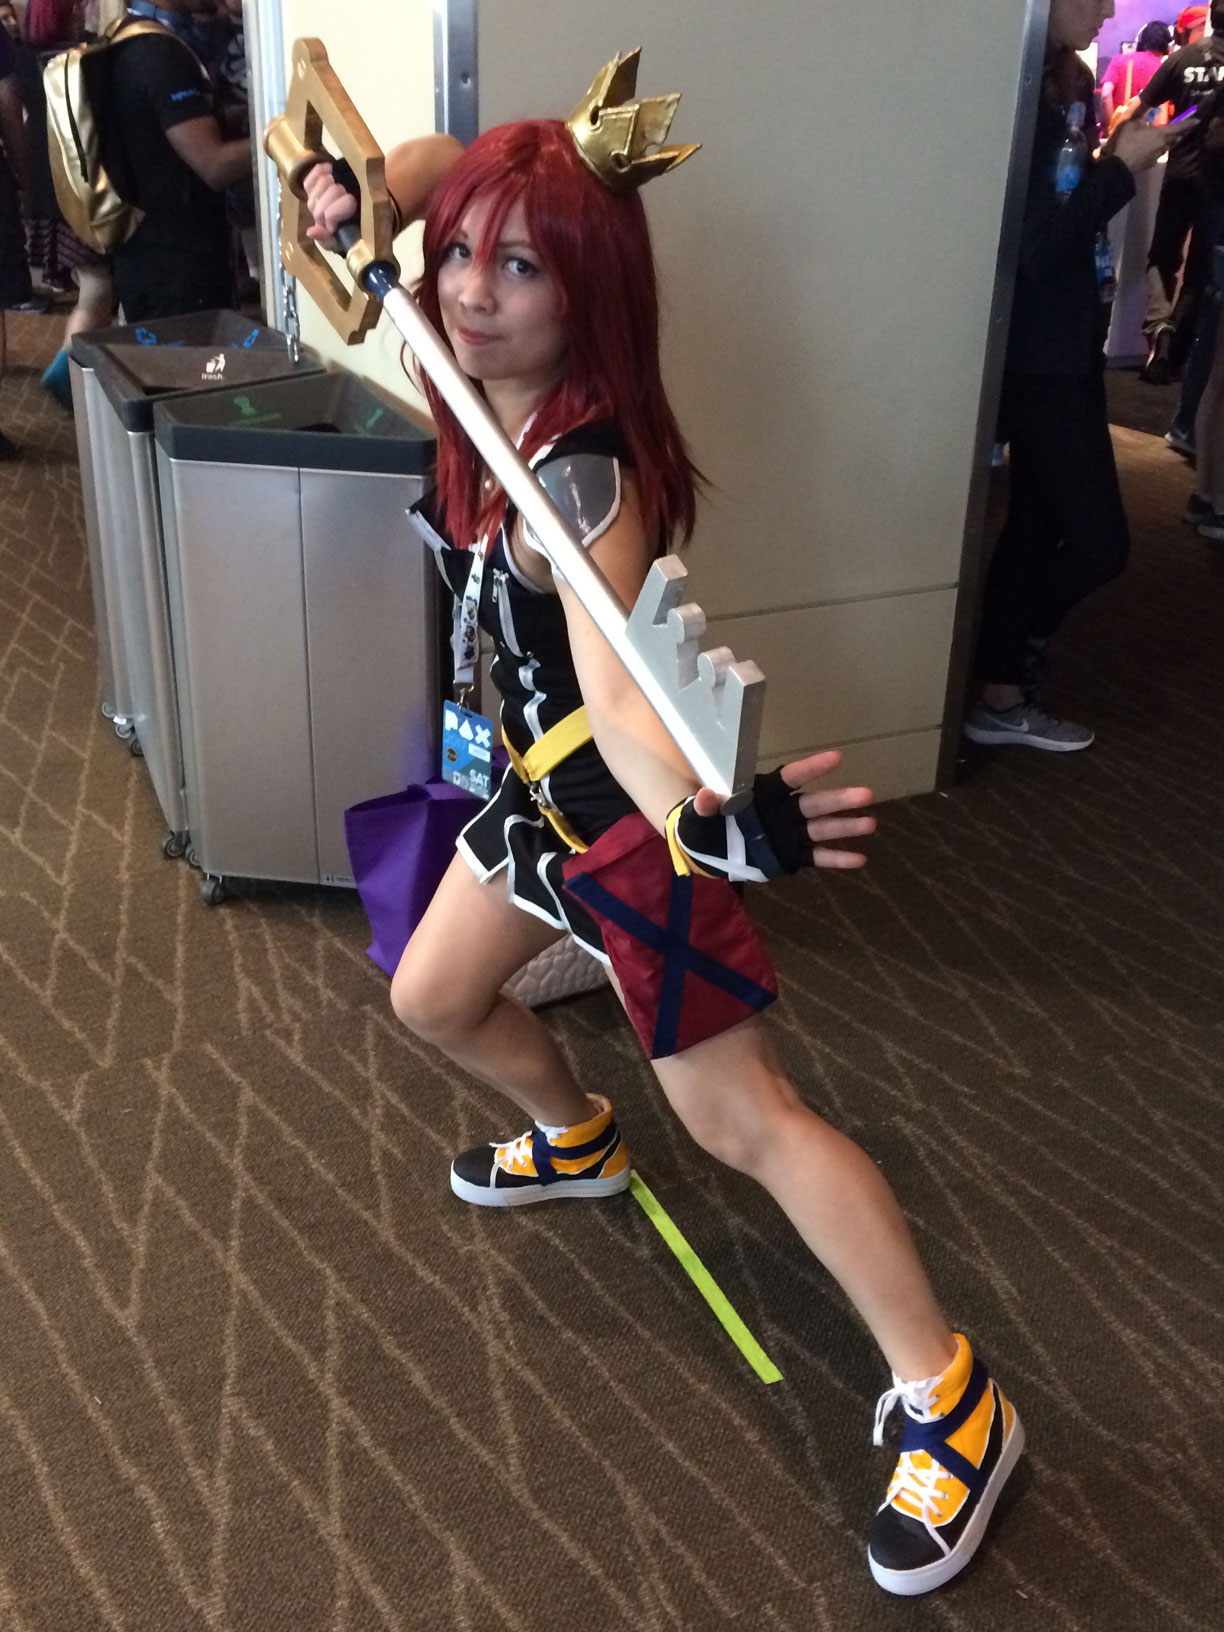 Pax West 2017 Cosplay Day 2 Kingdom of Hearts